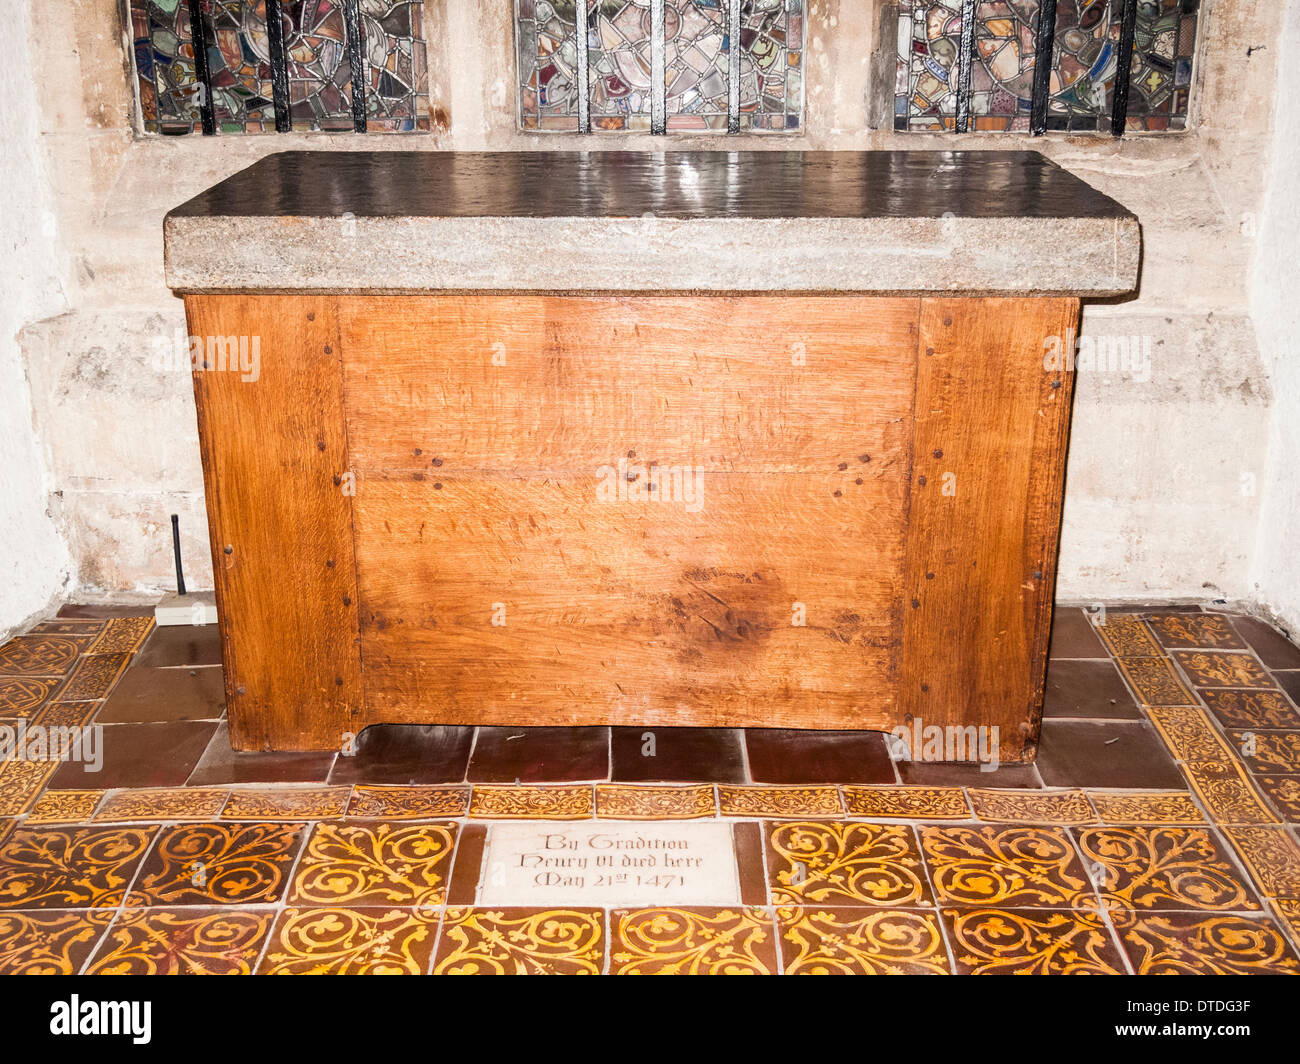 Chest and plaque in Wakefield Tower, Tower of London, UK, where by tradition Henry VI, King of England, died on 21 May 1471 Stock Photo